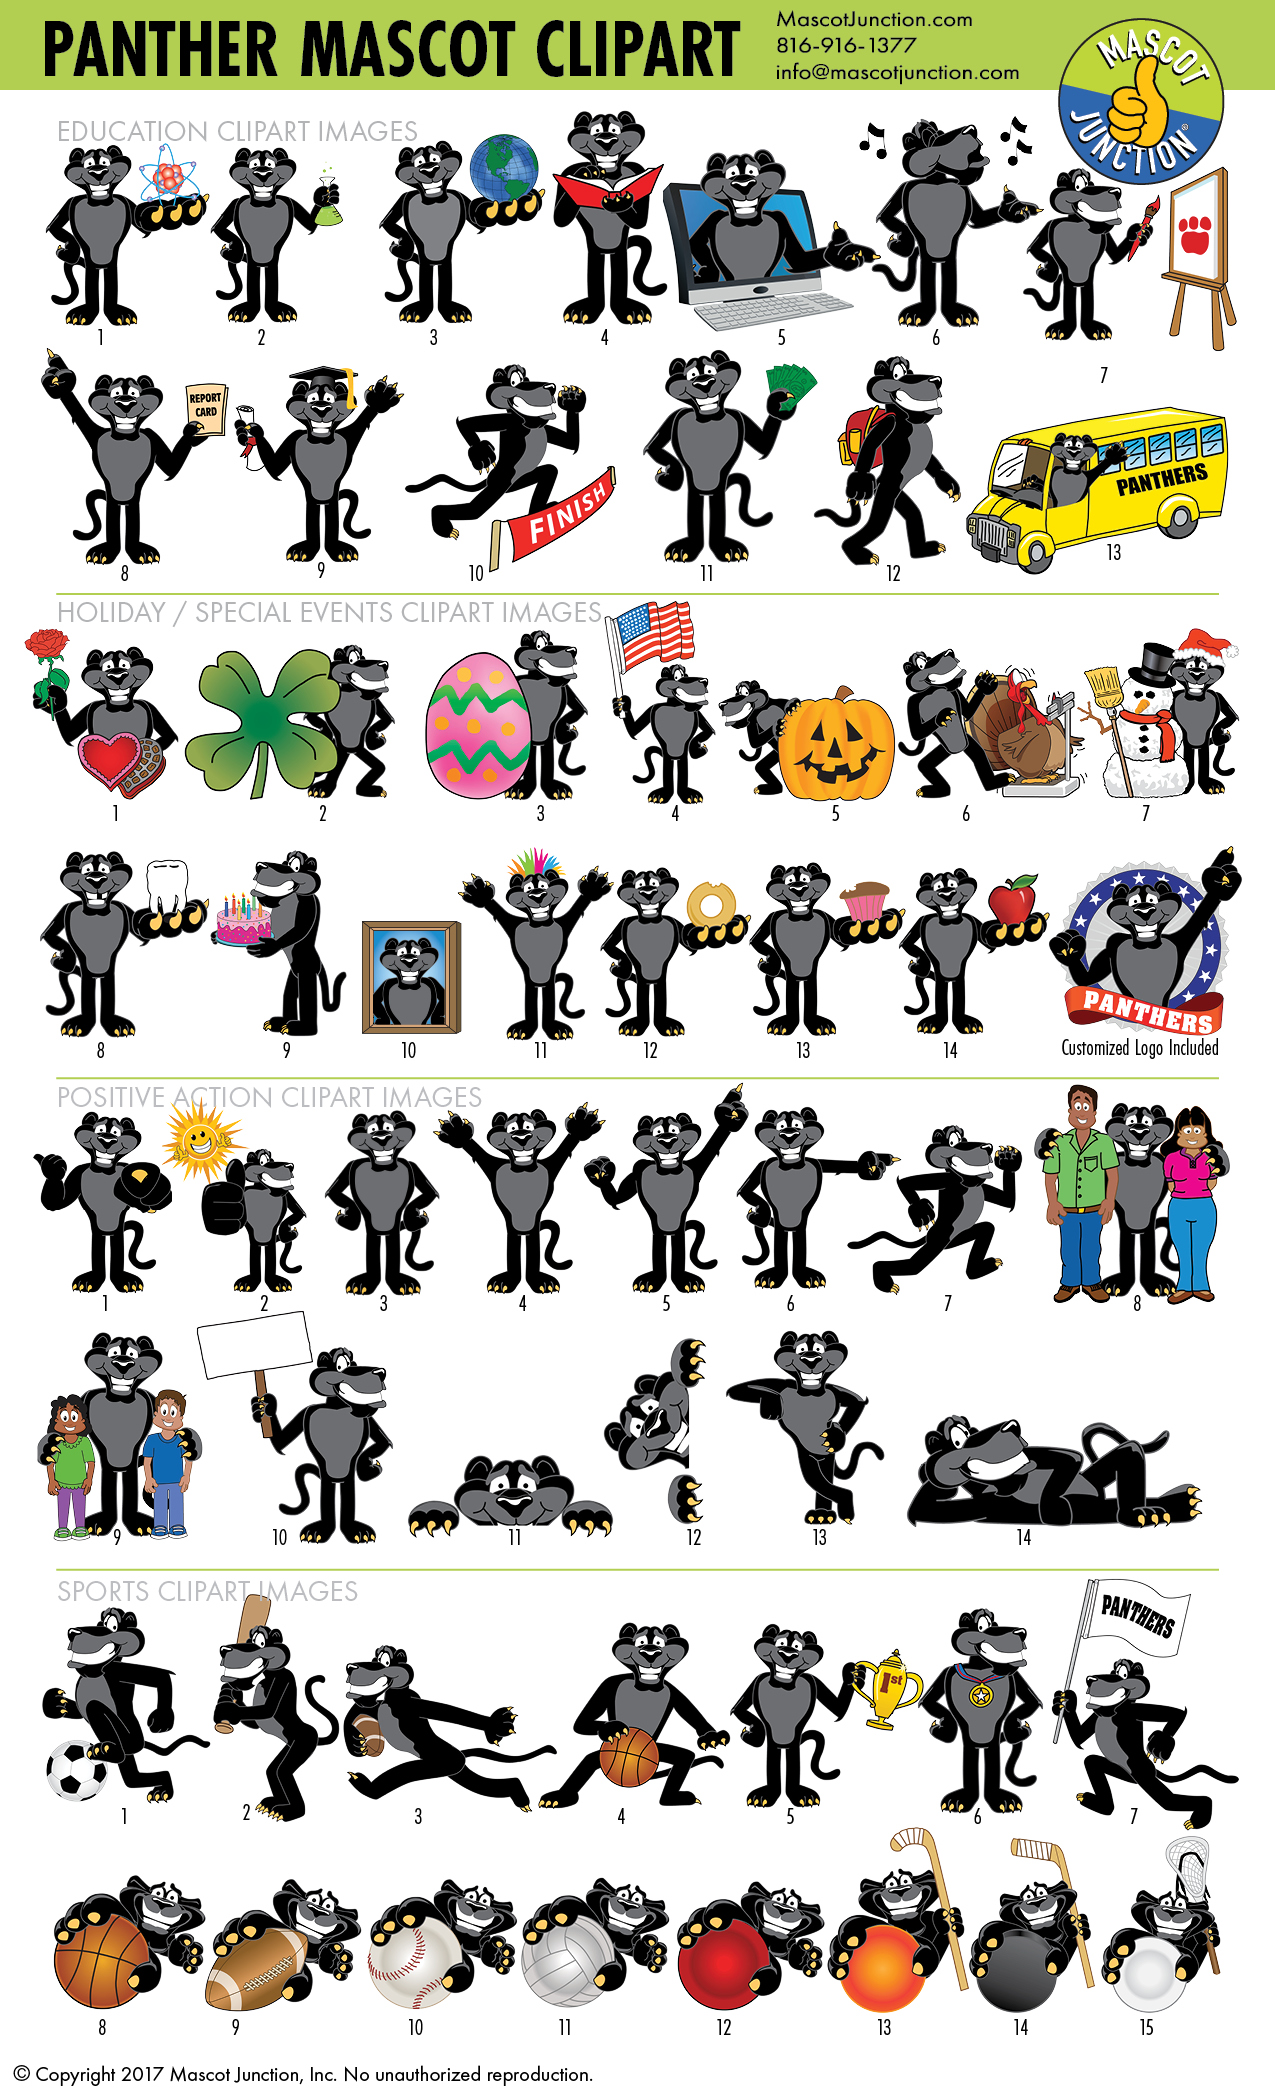 Panther Mascot Clipart Illustrations